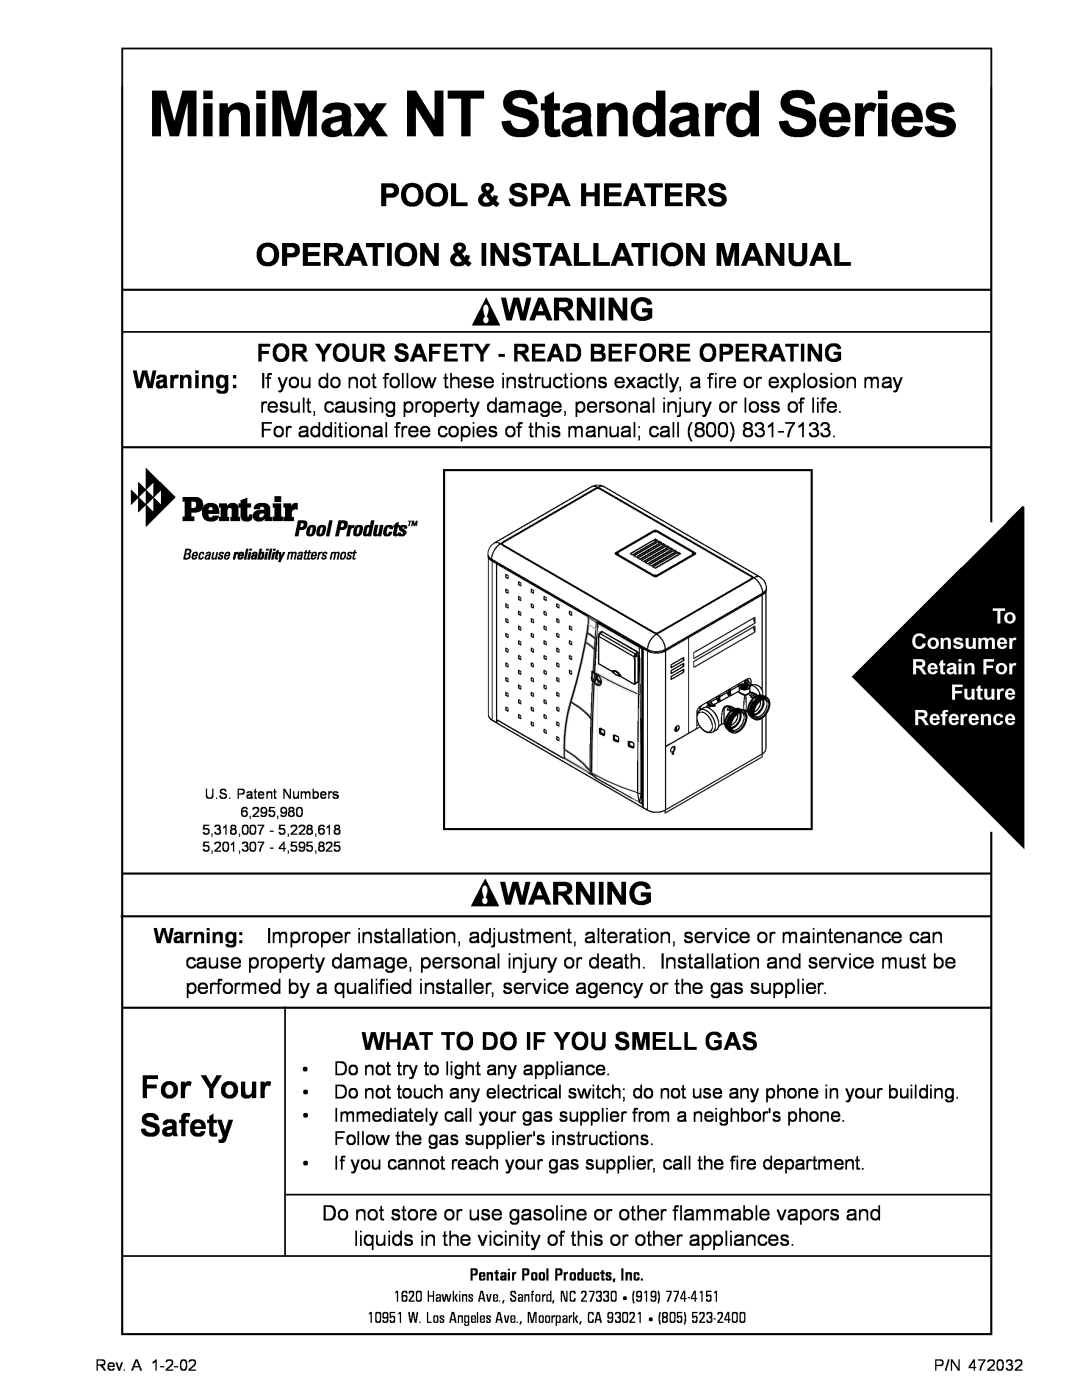 Pentair NT Standard Series installation manual Pool & Spa Heaters, Operation & Installation Manual, For Your Safety 